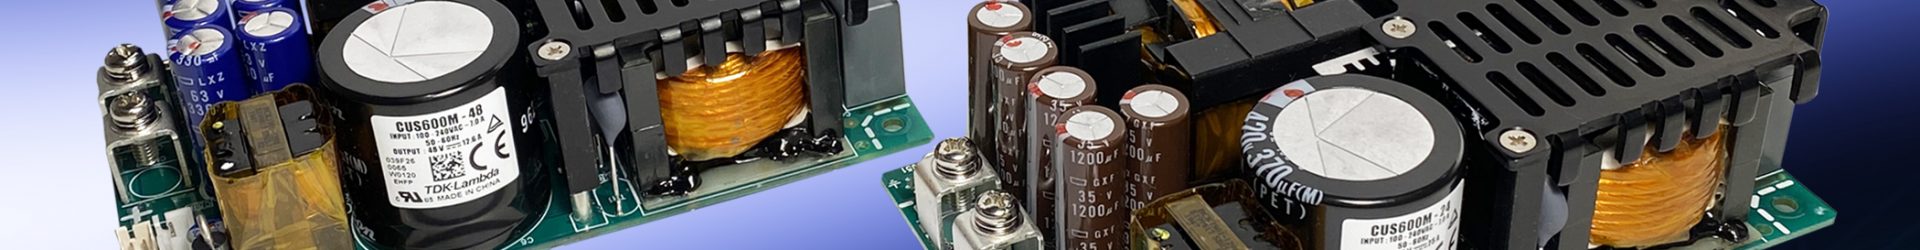 TDK medical and industrial power supplies